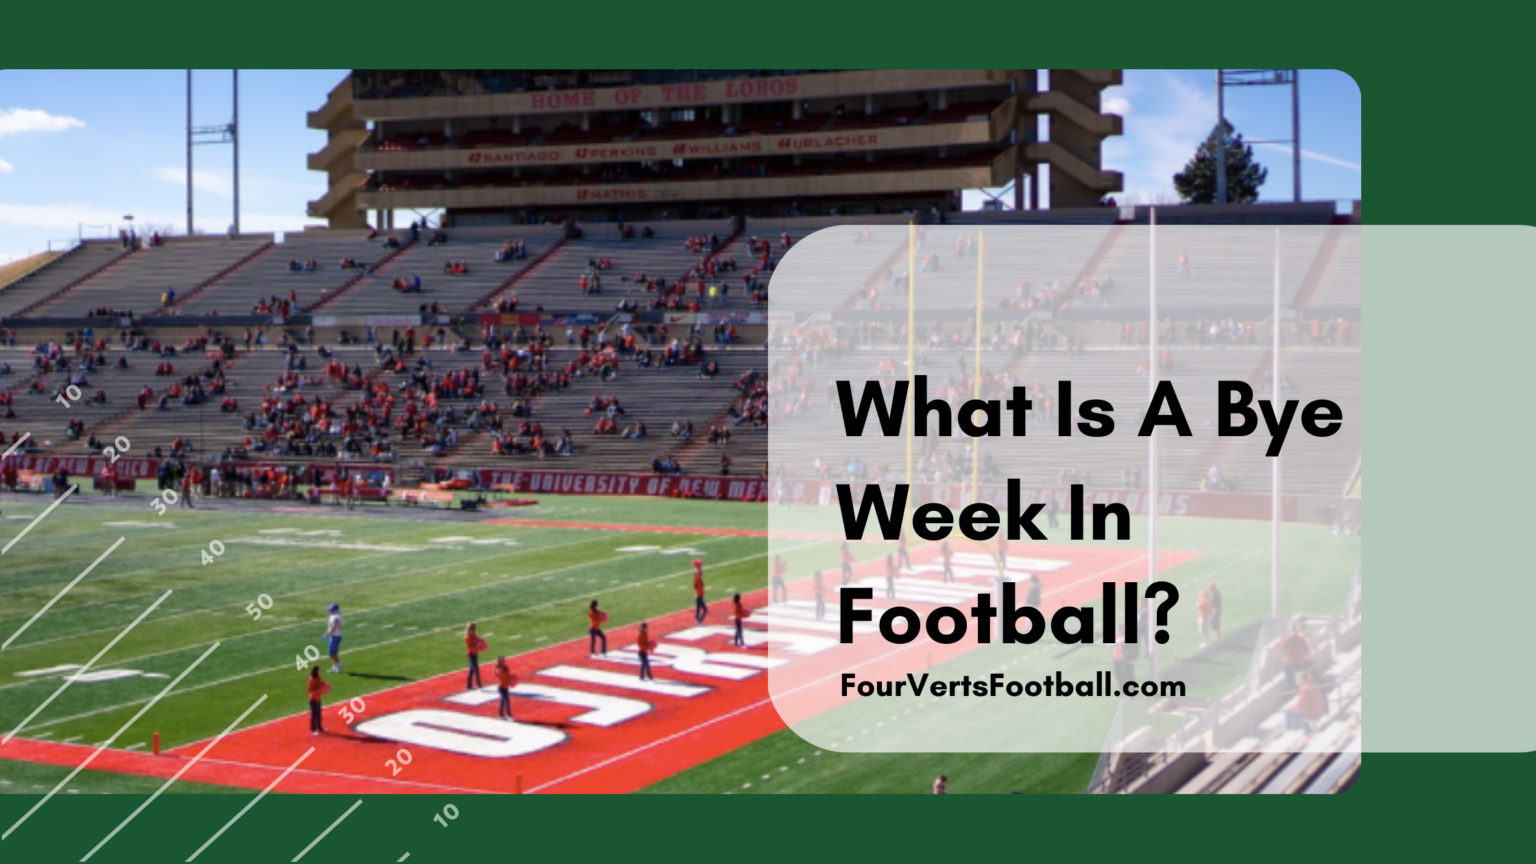 What Is A Bye Week In Football Four Verts Football